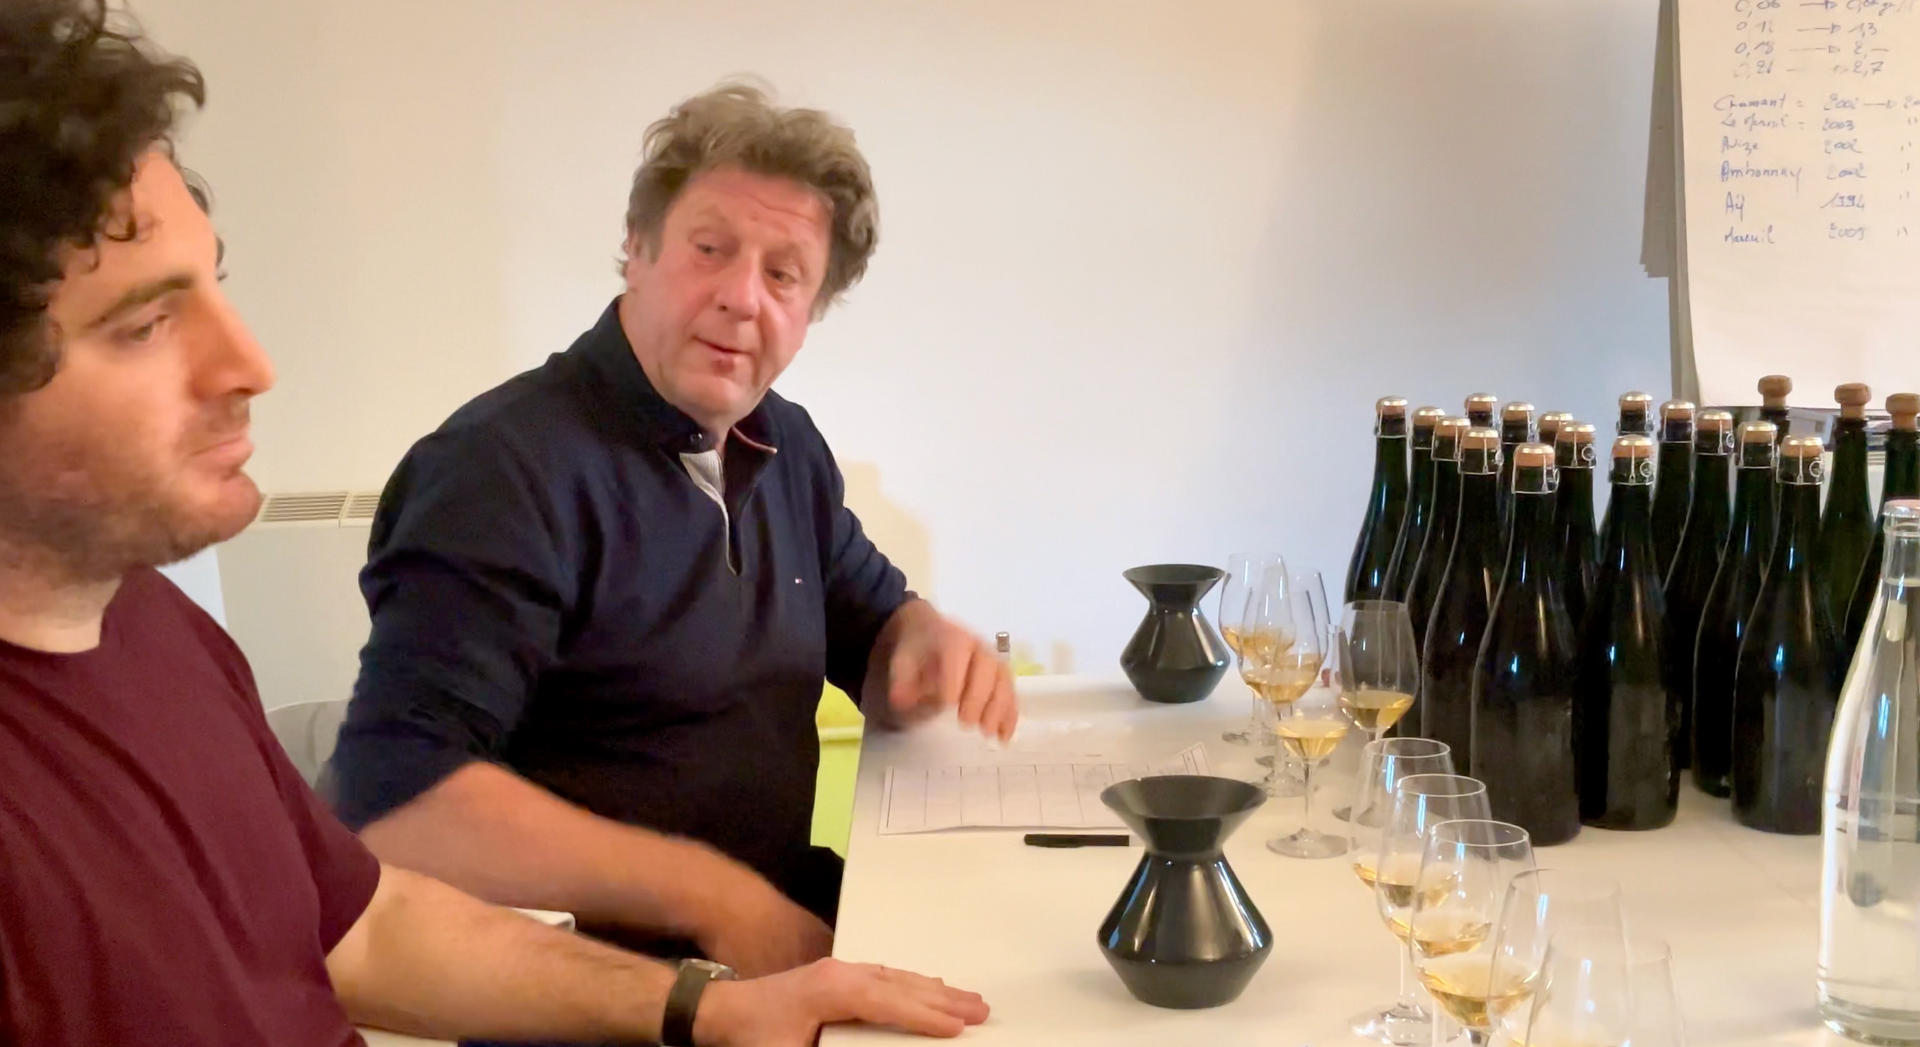 Anselme and Guillaume Selosse, Domaine Jacques Selosse, Avize, Champagne, Dosage-Tasting